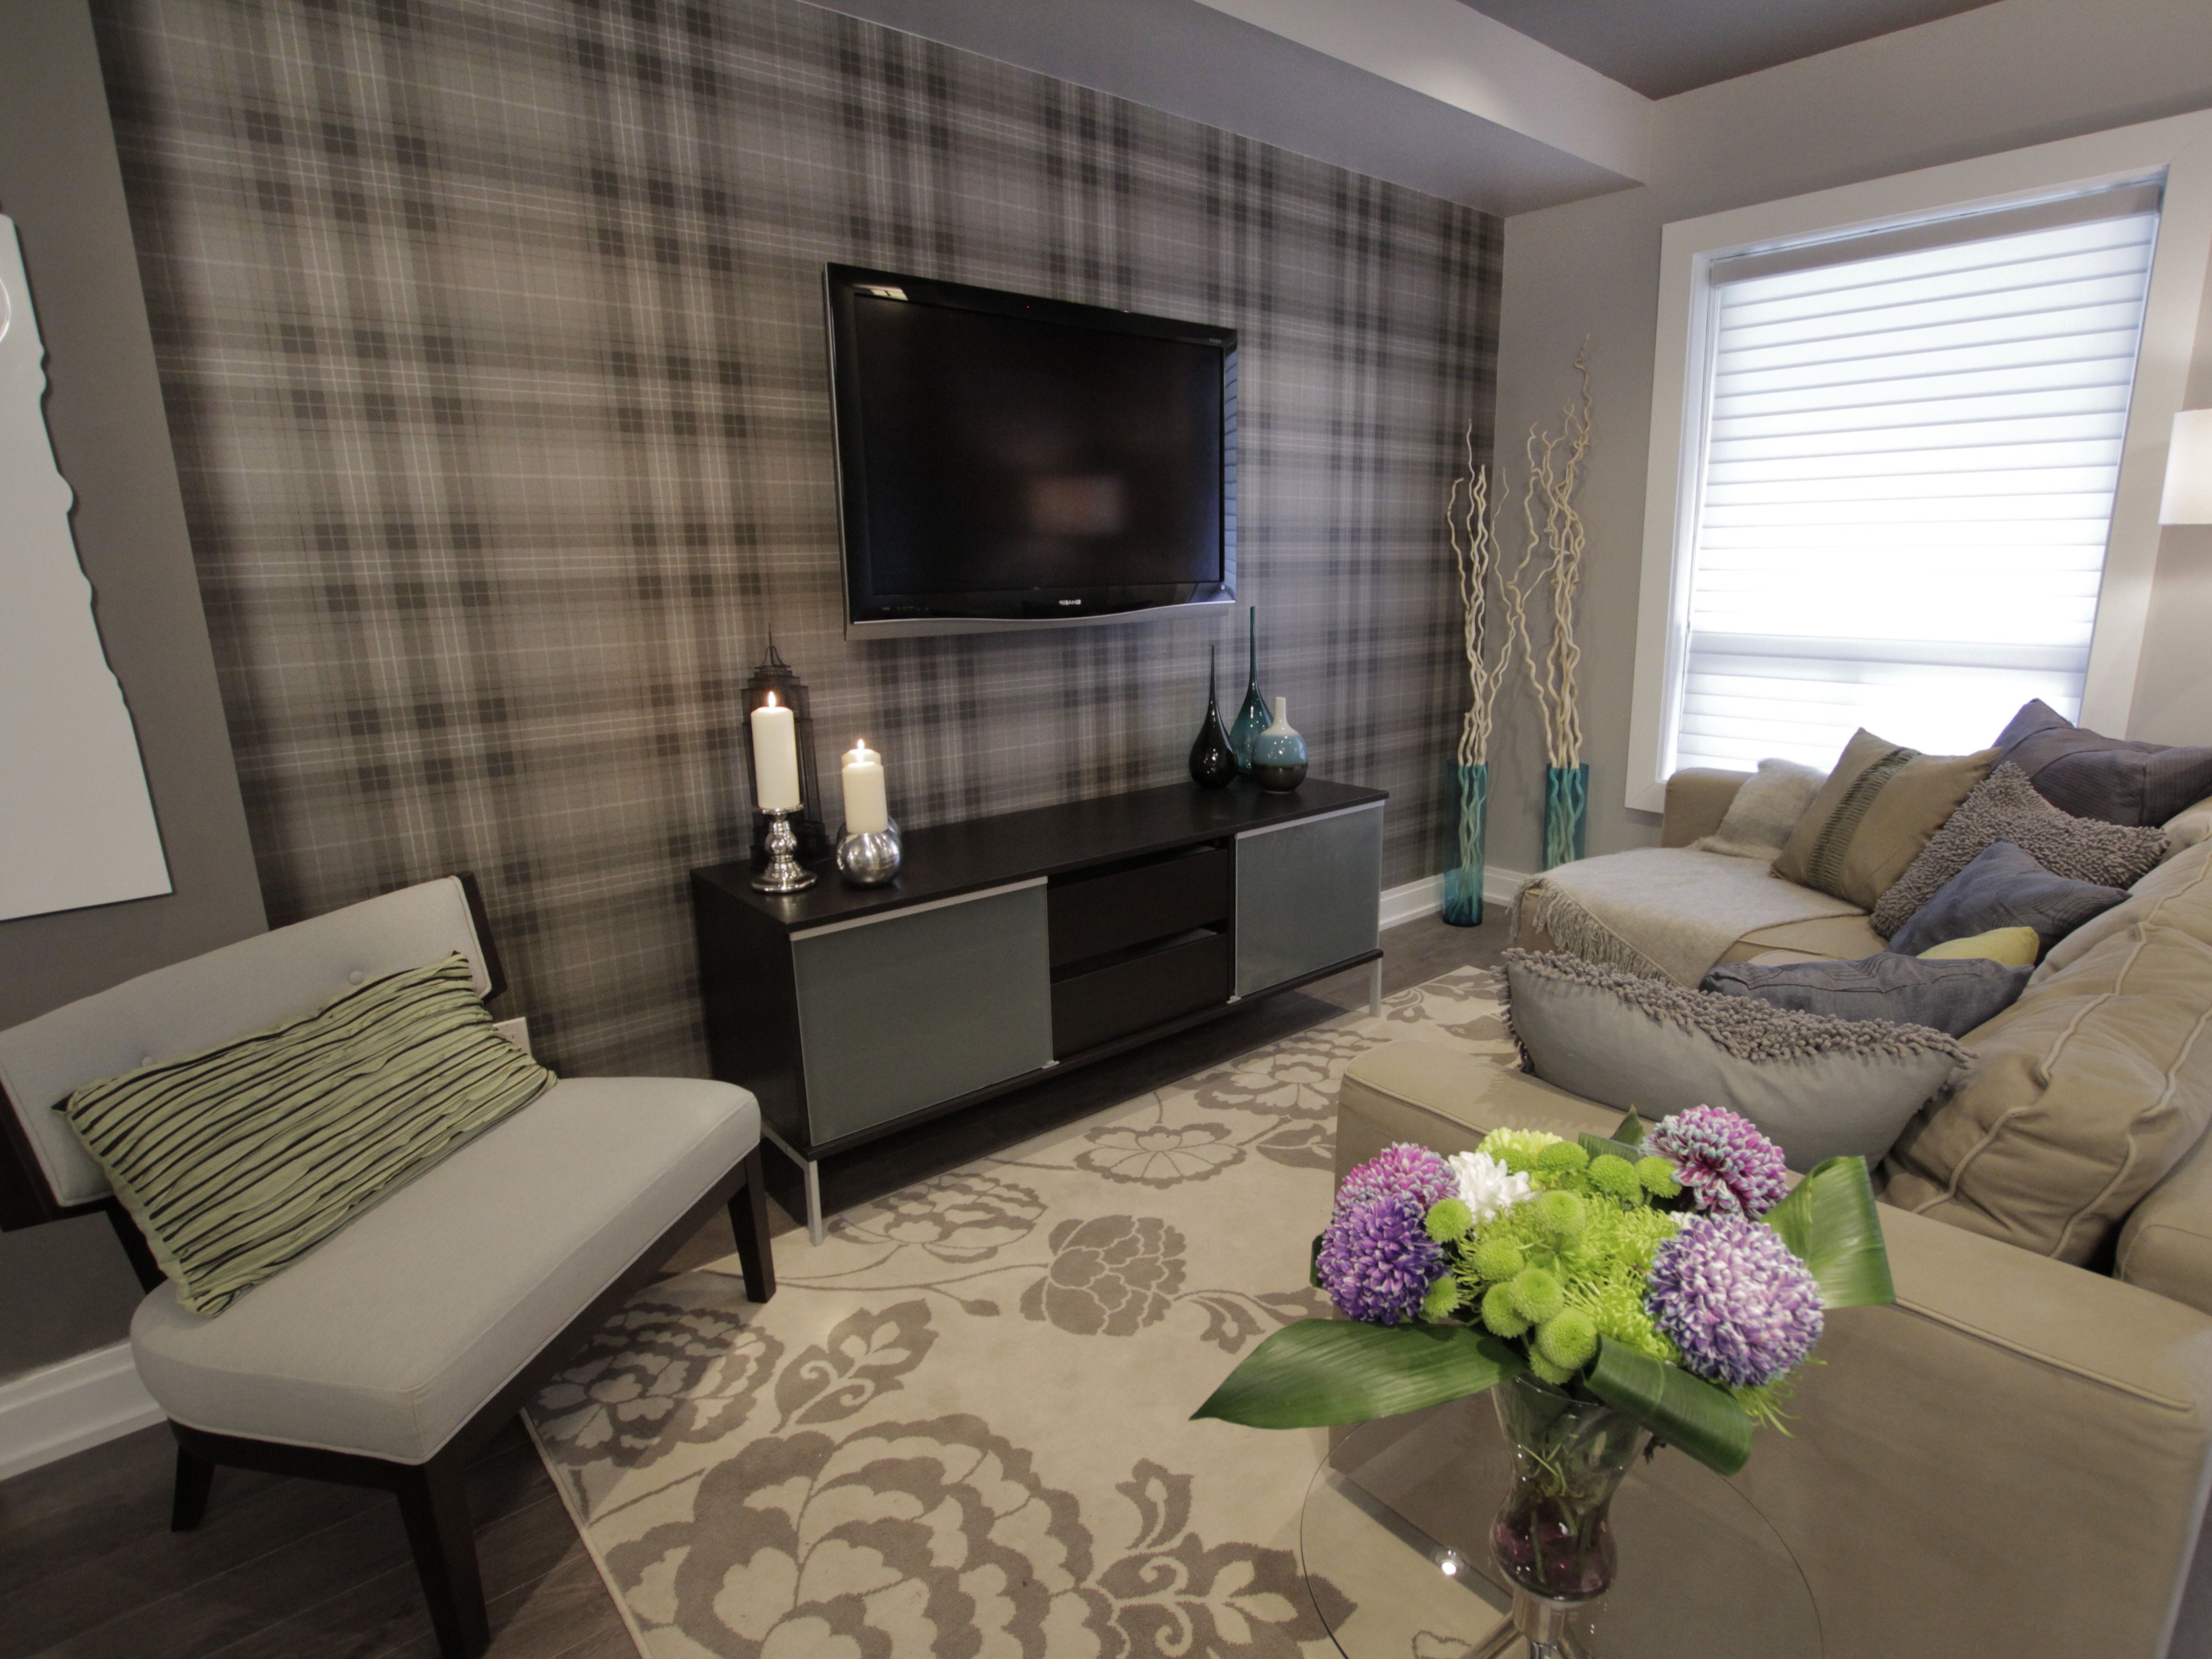 Apartment Living Room Wall Decor With Plaid Accent Wall (View 7 of 30)